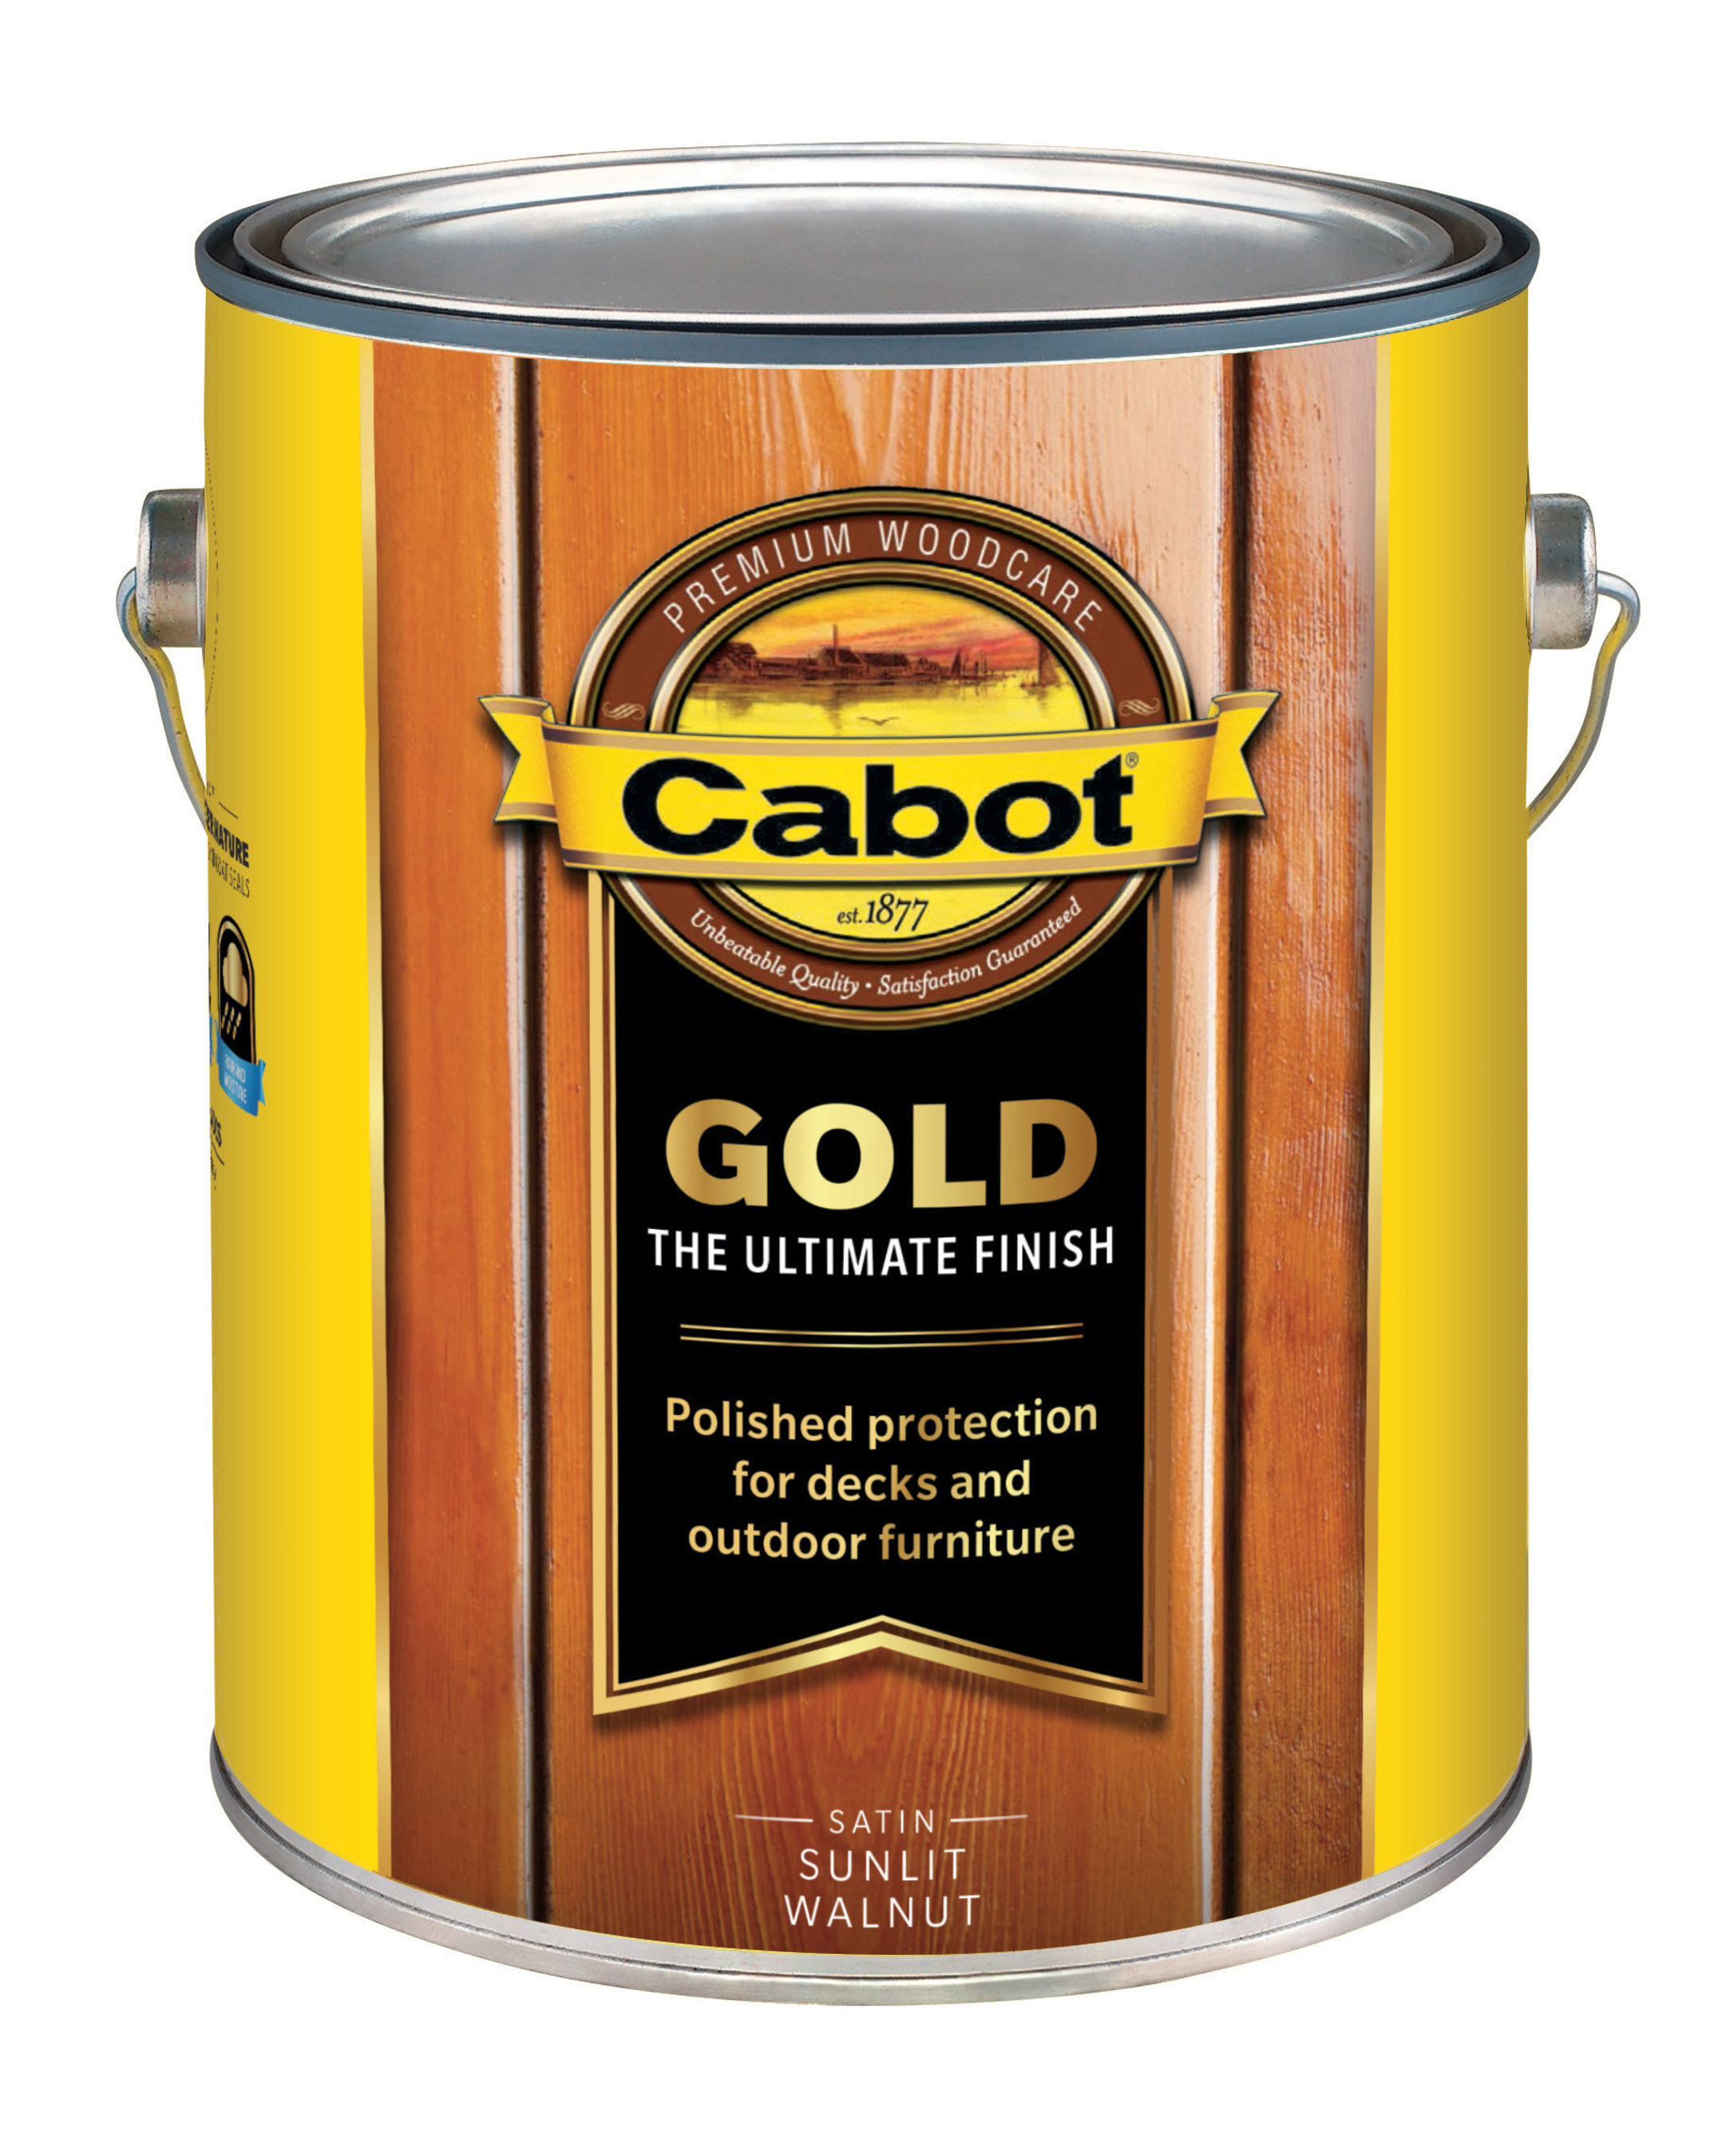 Cabot Exterior Woodcare Launches New Cabot Gold Finish